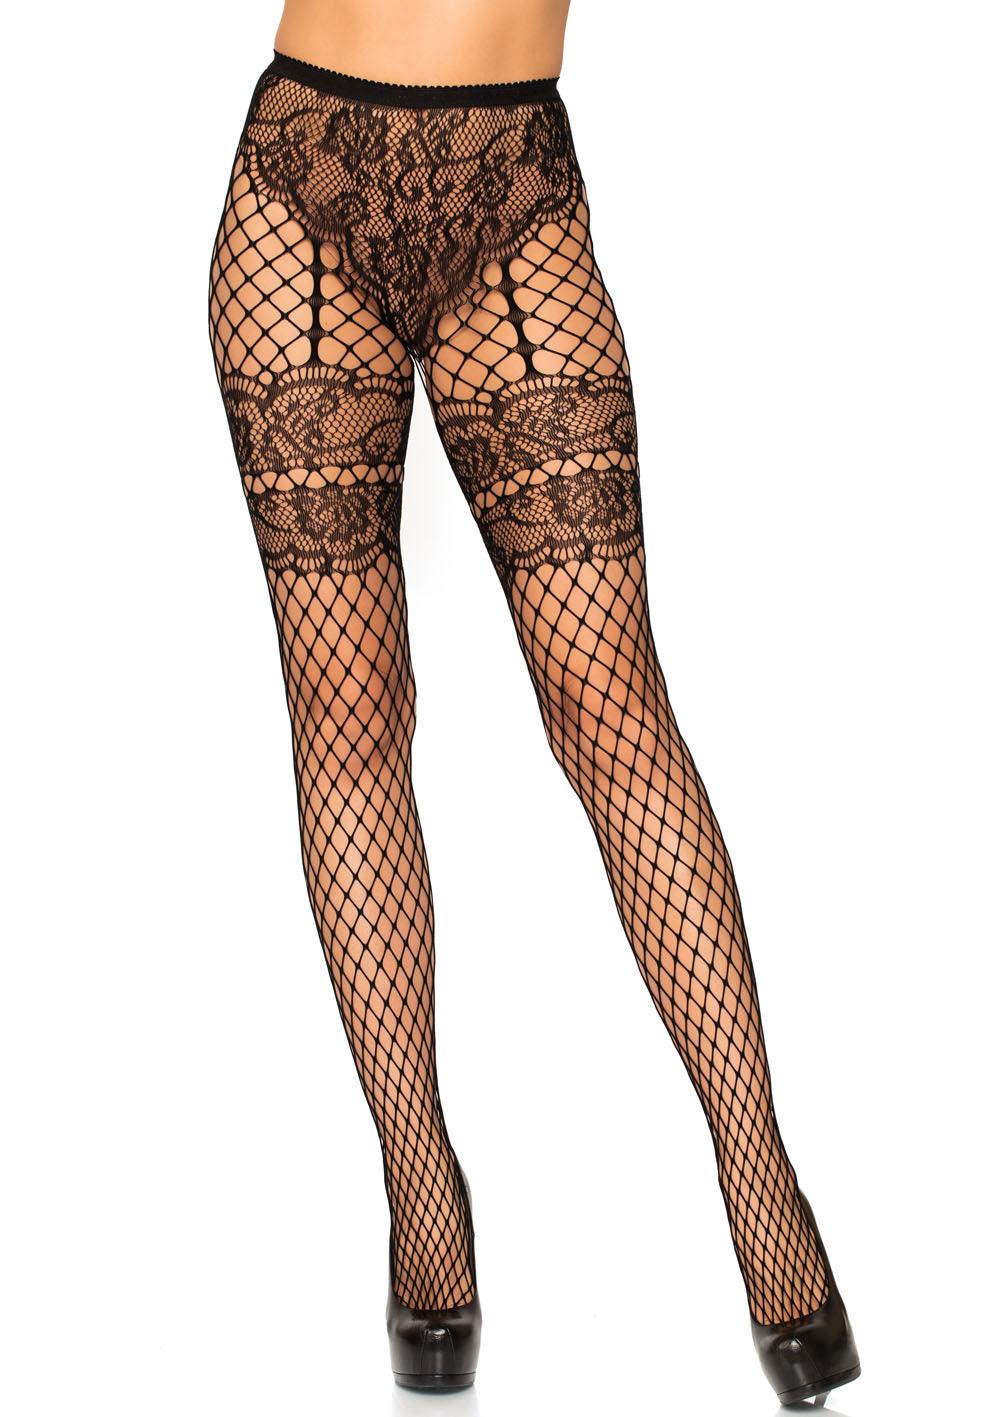 Lace French Cut Faux Garter Net Tights - One Size Black - My Sex Toy Hub